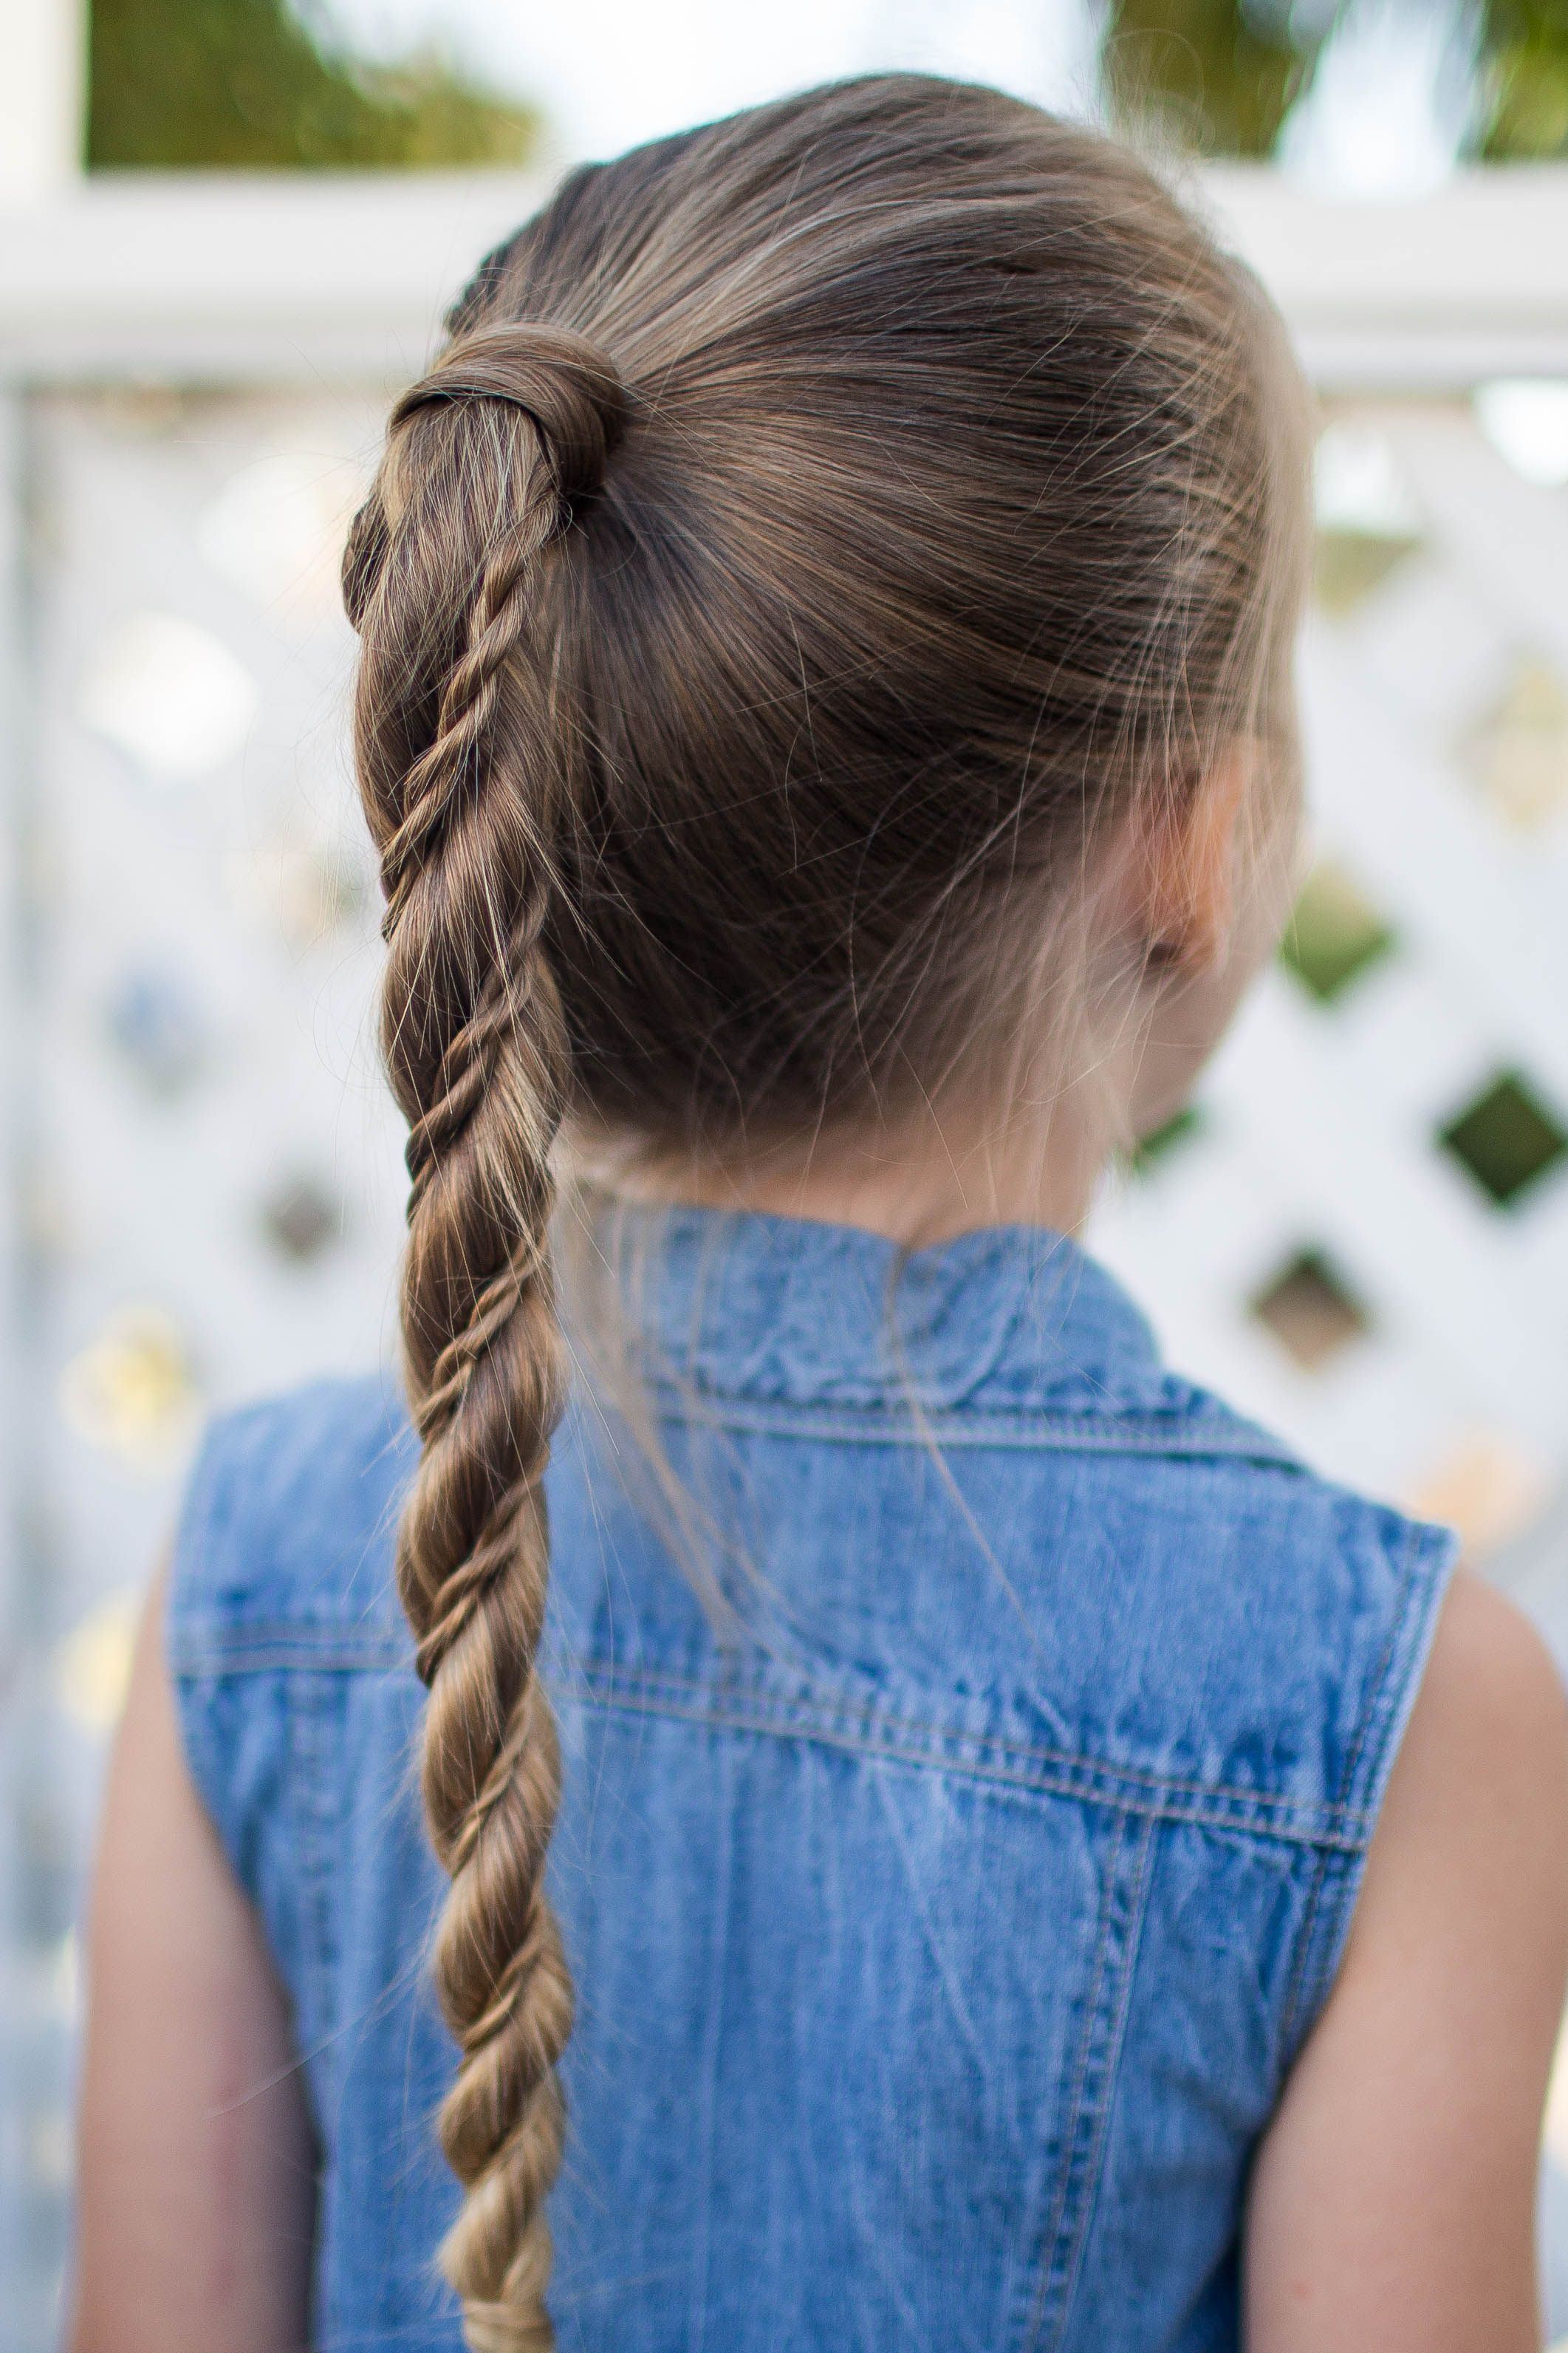 Cute Summer Updo - Stylish Life for Moms